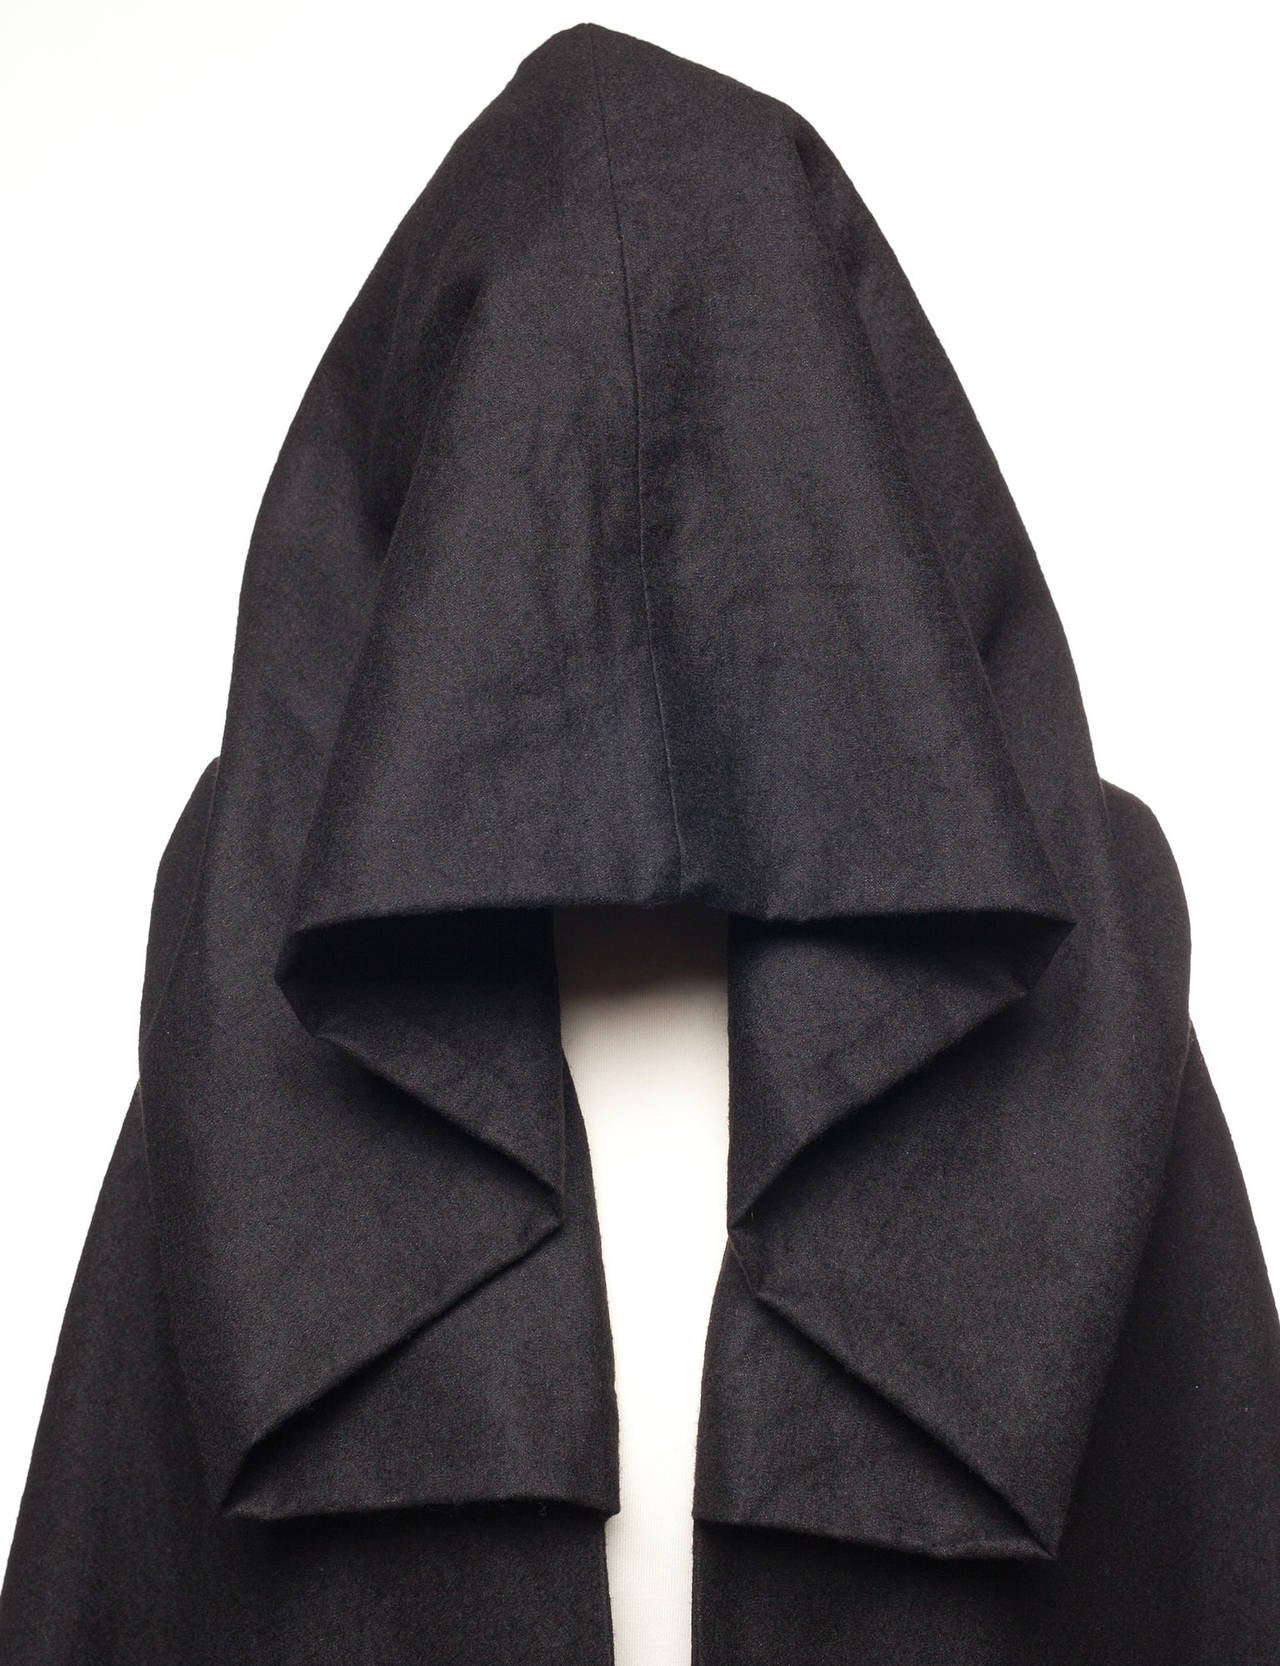 Cape has extra long extensions on both side, 2 arm holes, and oversized hood. It can be worn as a scarf or as a vest. German size 38, US 10.